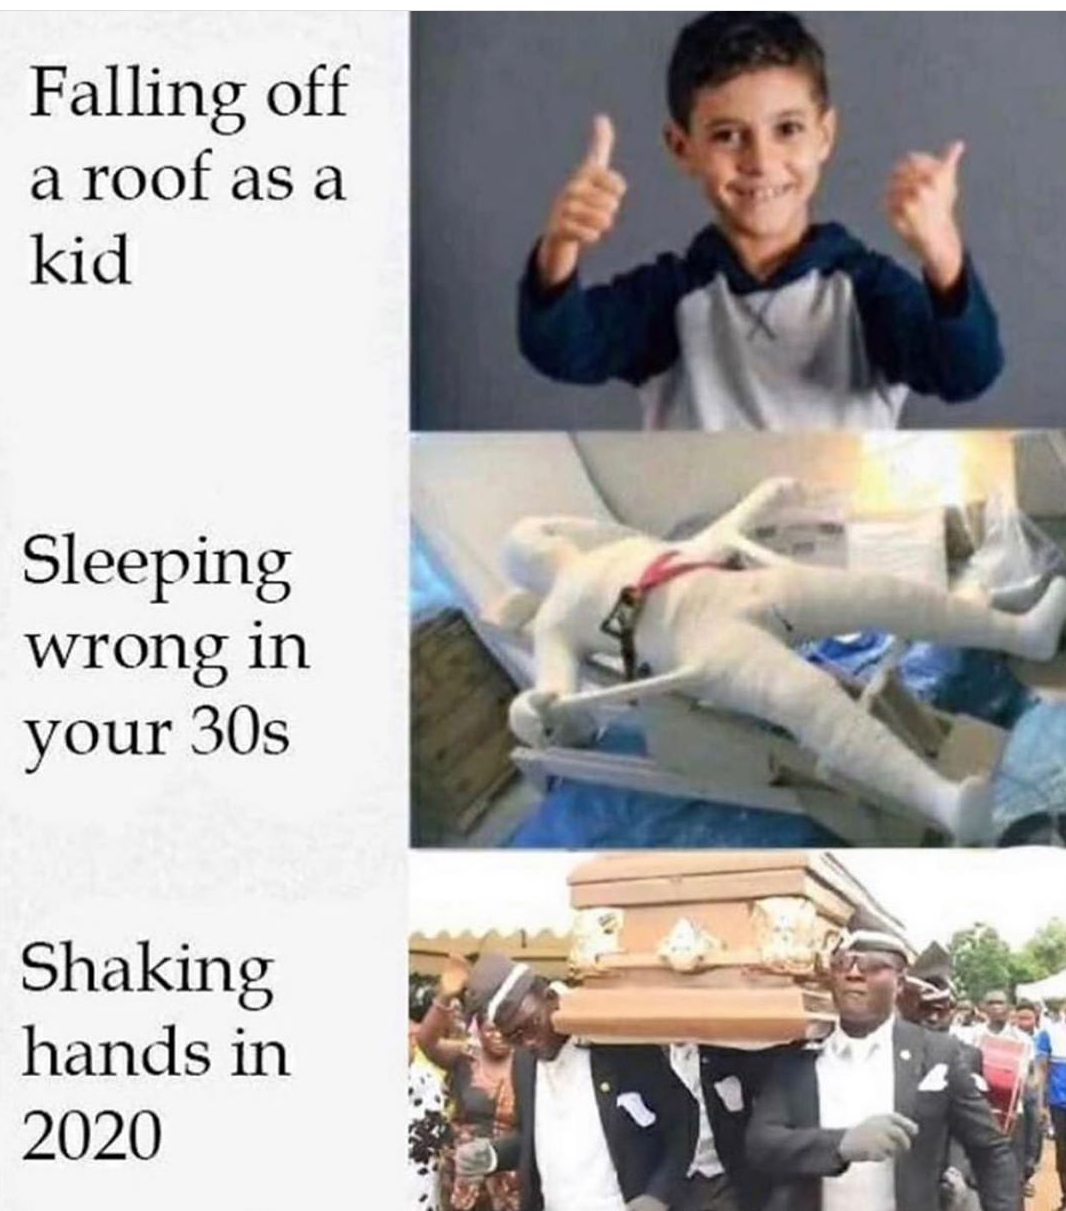 sleeping weird in your 30s - Falling off a roof as a kid Sleeping wrong in Your 30s Shaking hands in 2020